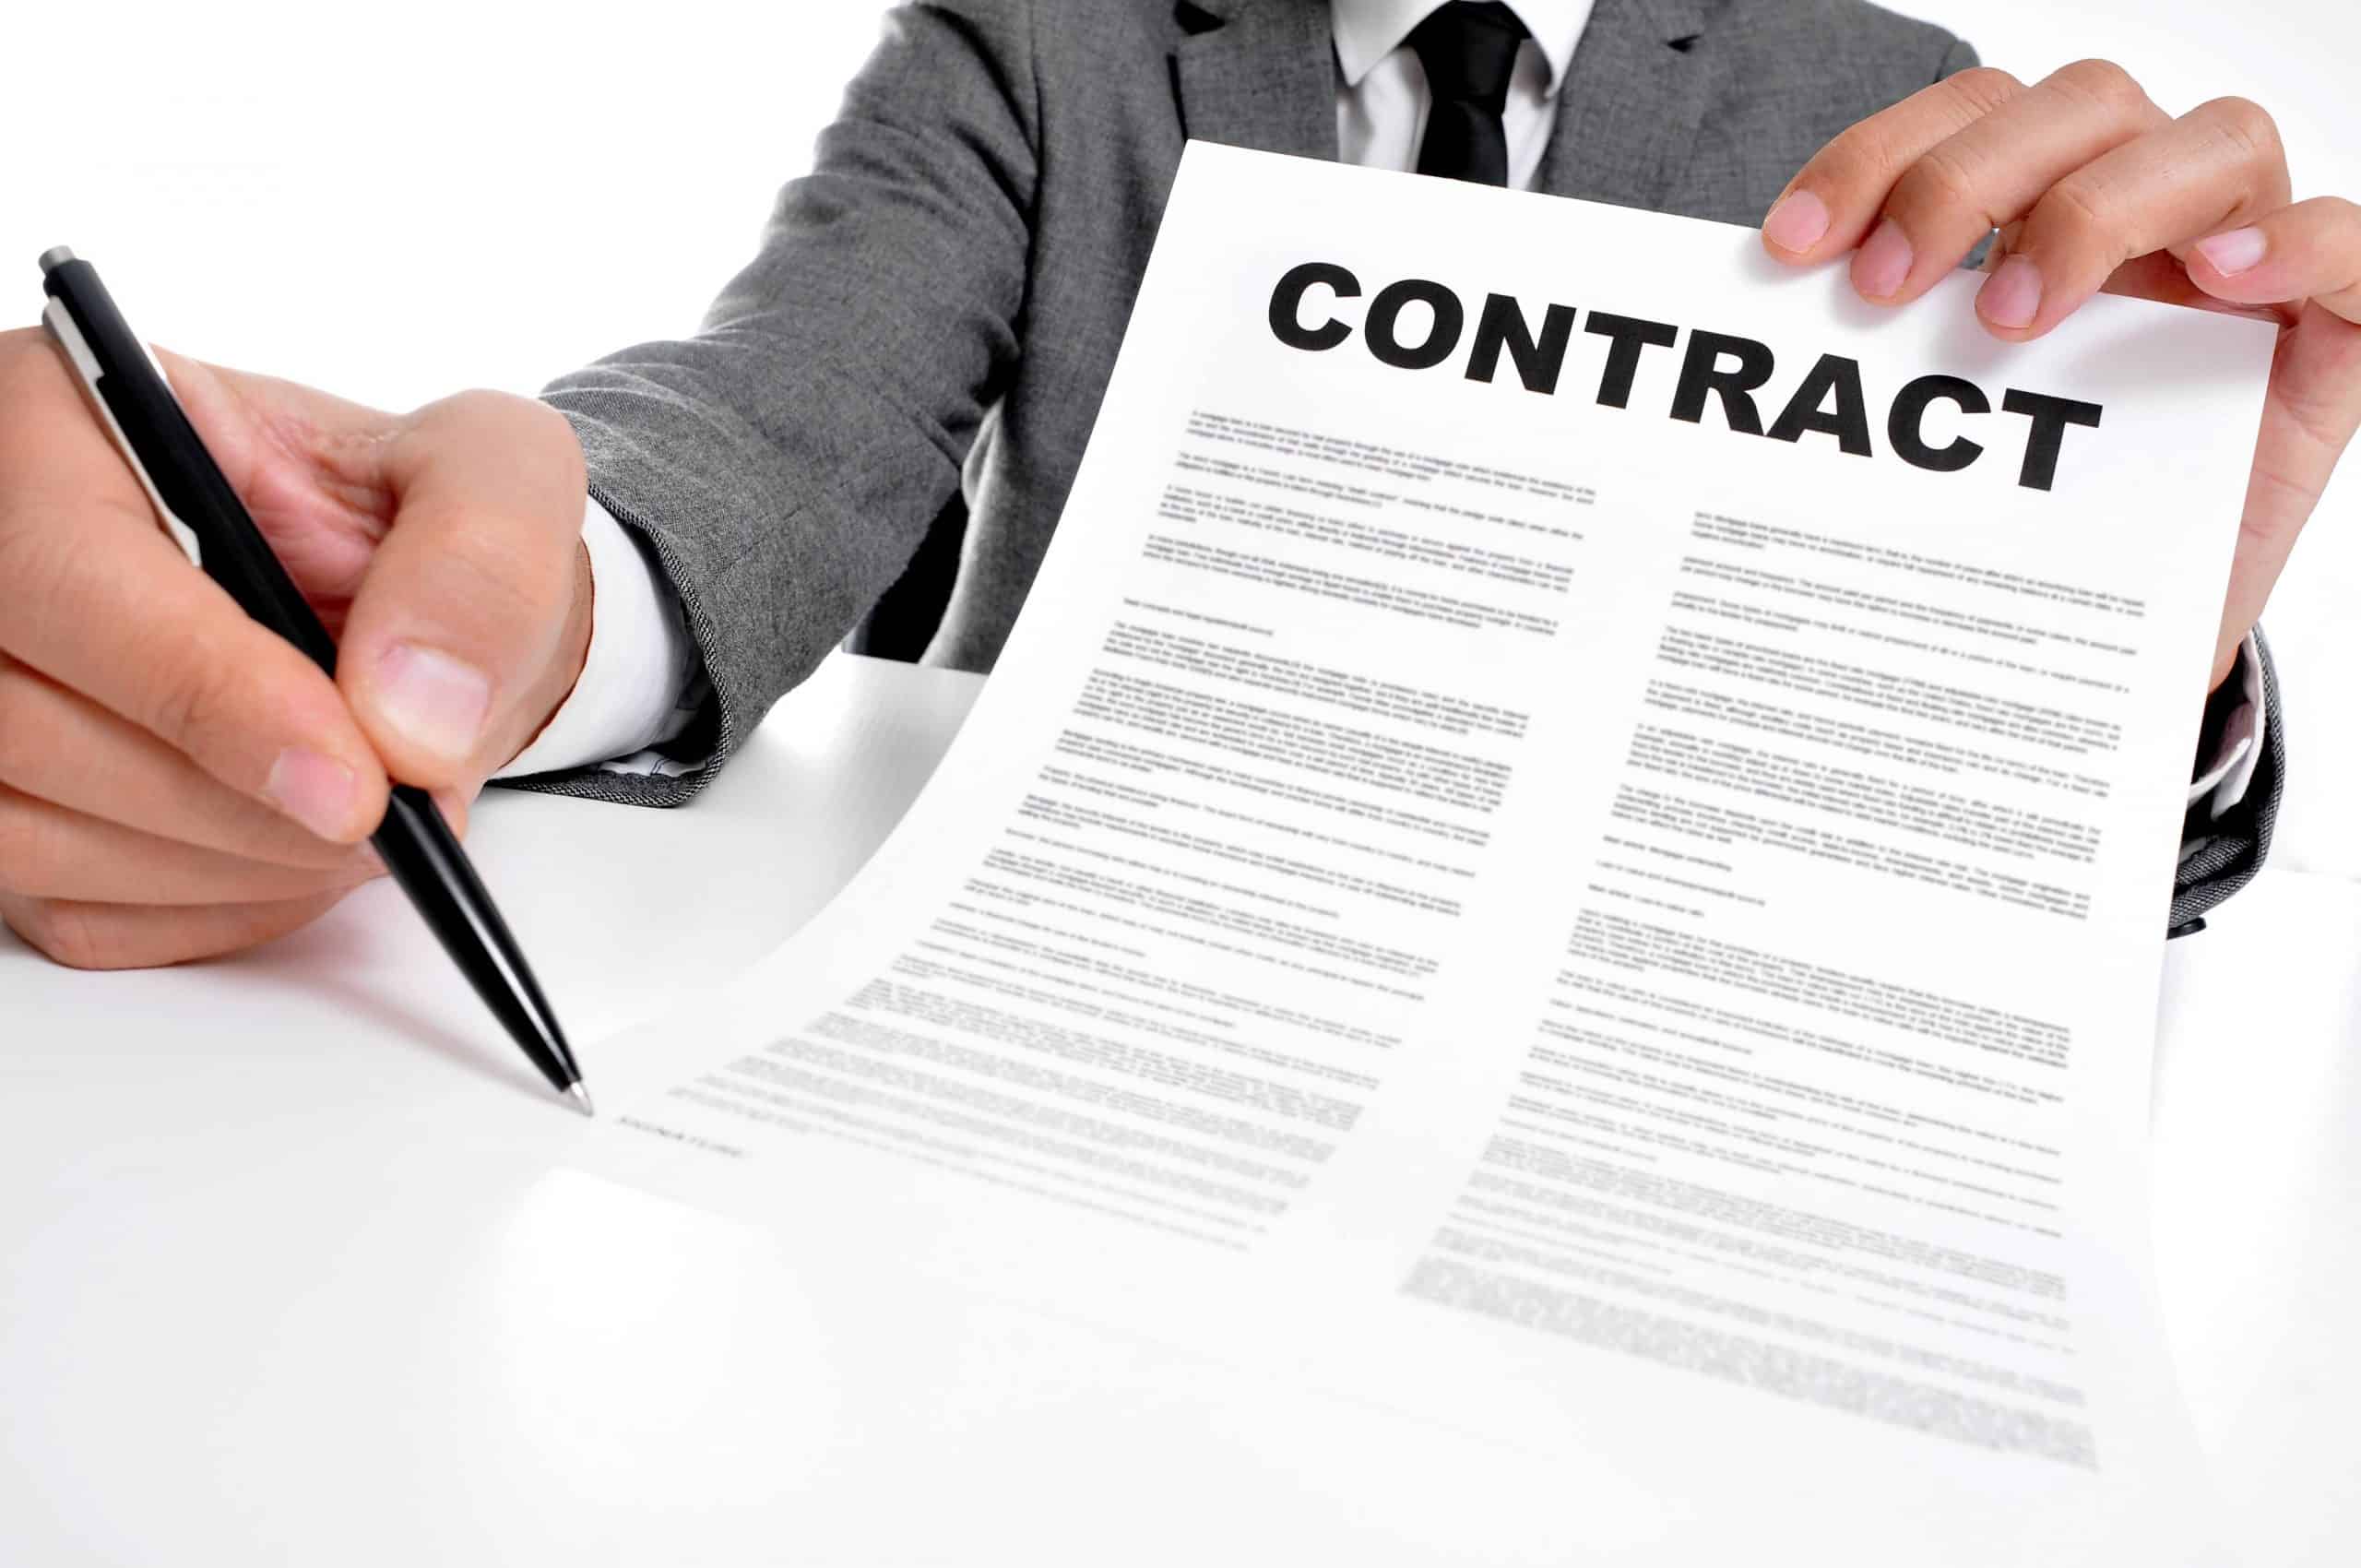 Restrictive Covenants in Employment Contracts